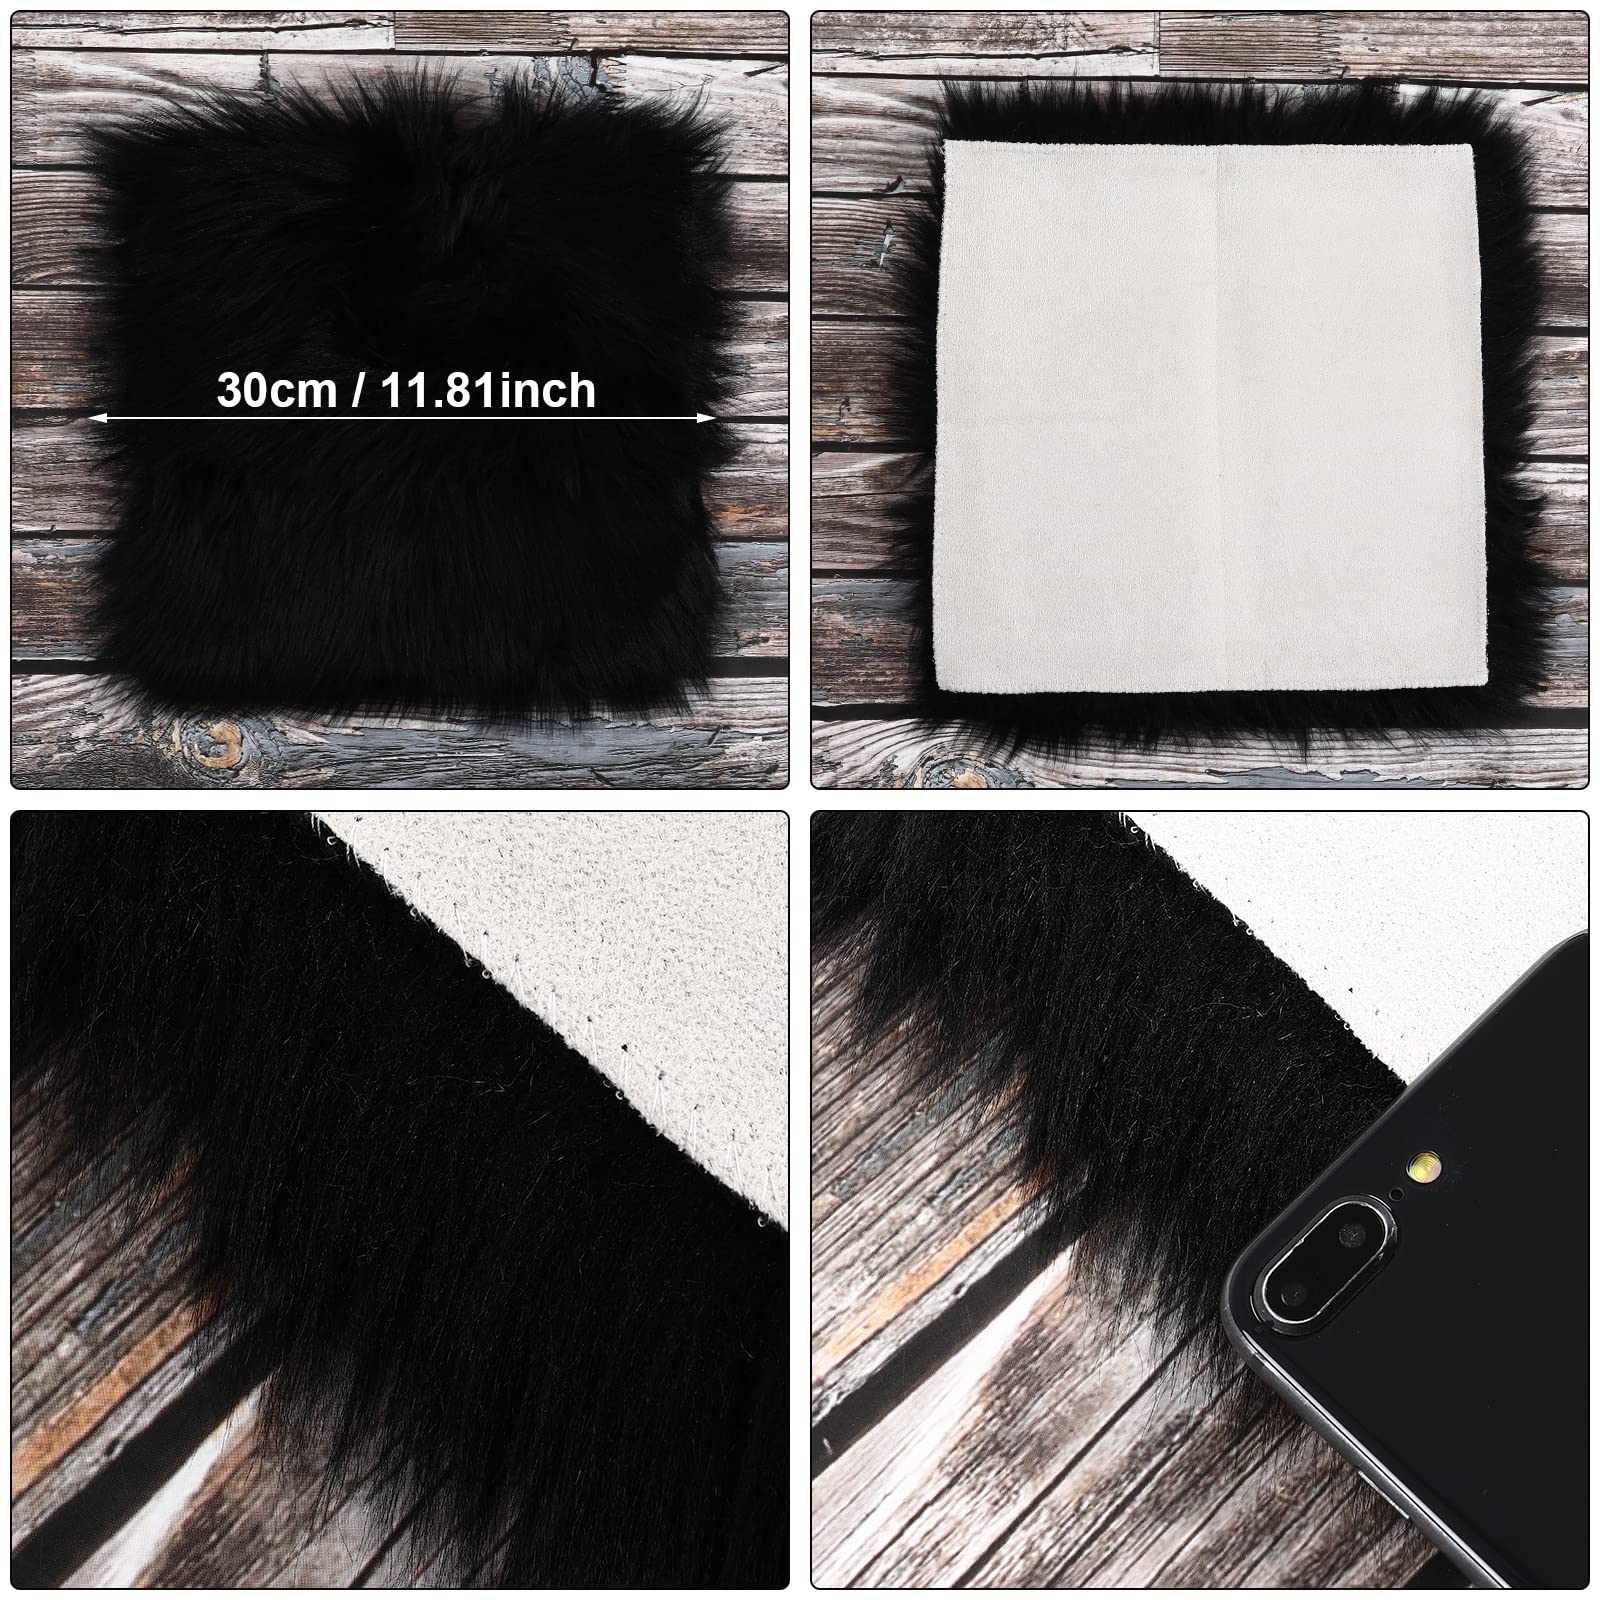 Sibba Faux Fur Area Rugs Chair Pad Protectors 12 inch Mini Square Cover Seat Fuzzy Cushion Carpet Mat Soft Fluffy Rug Couch for Living Bedroom Sofa Nail Art Photography Background Locker Decor (Black)